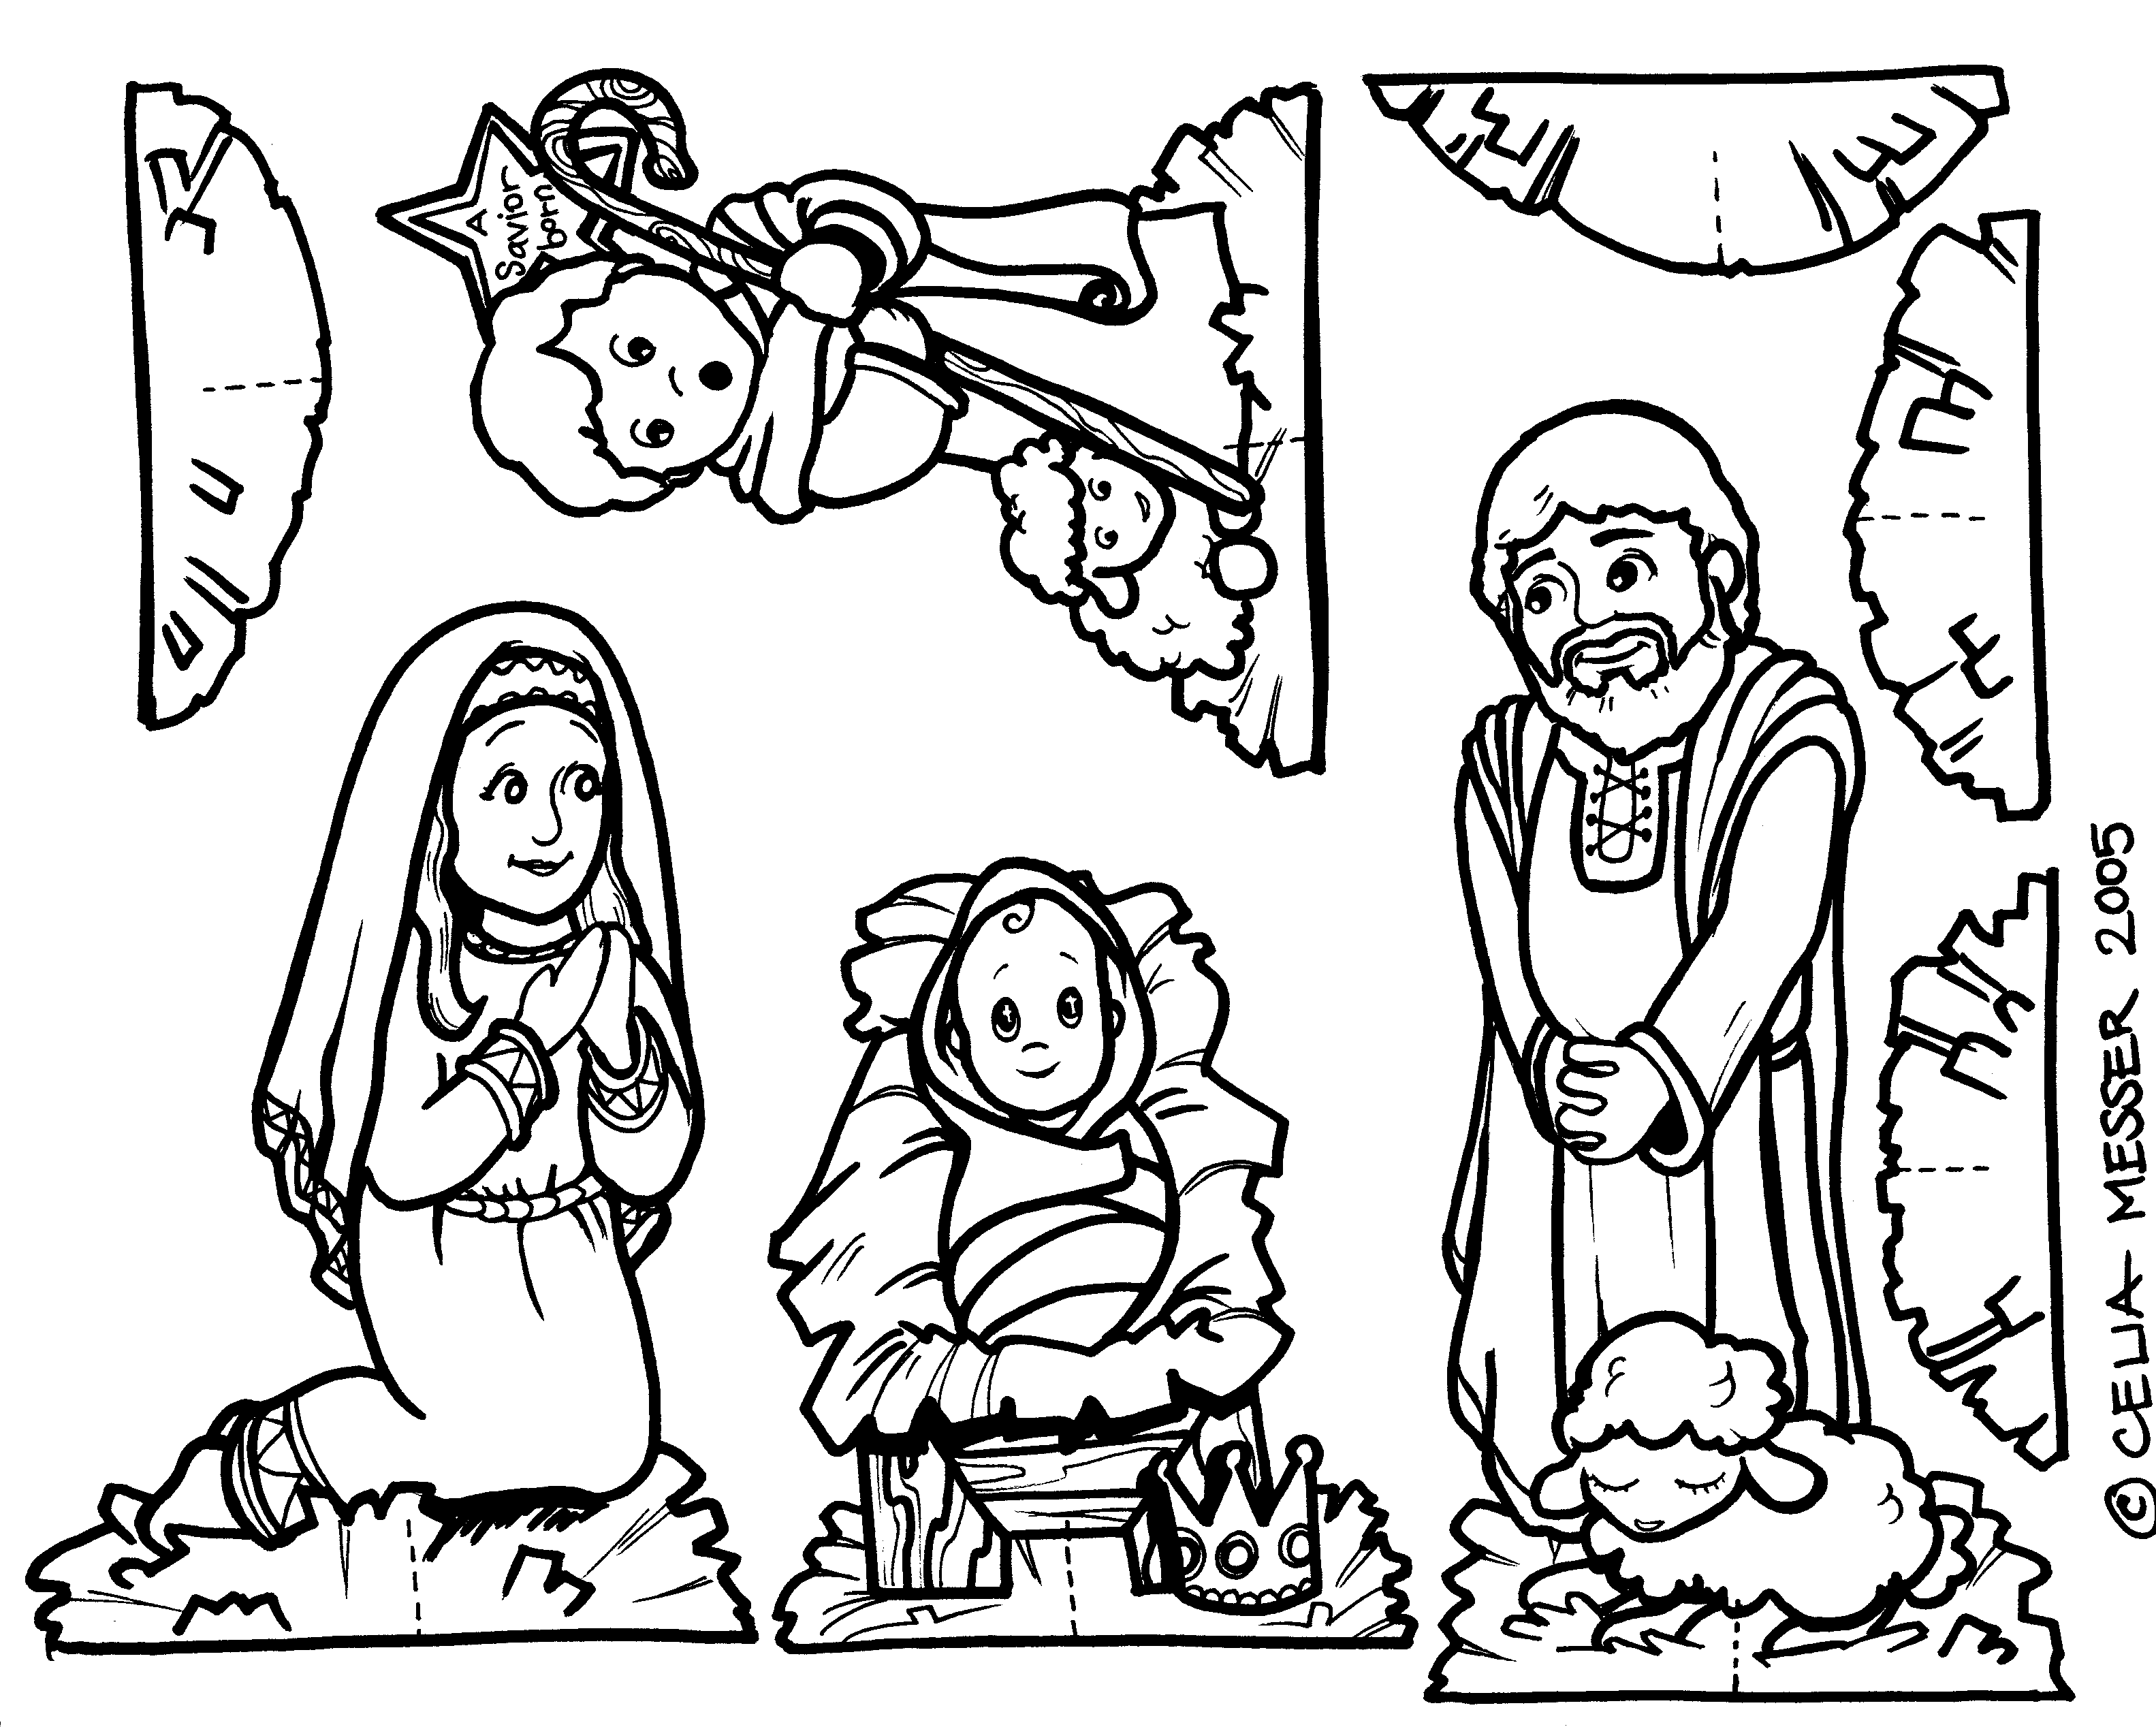 free-free-nativity-coloring-pages-printable-download-free-free